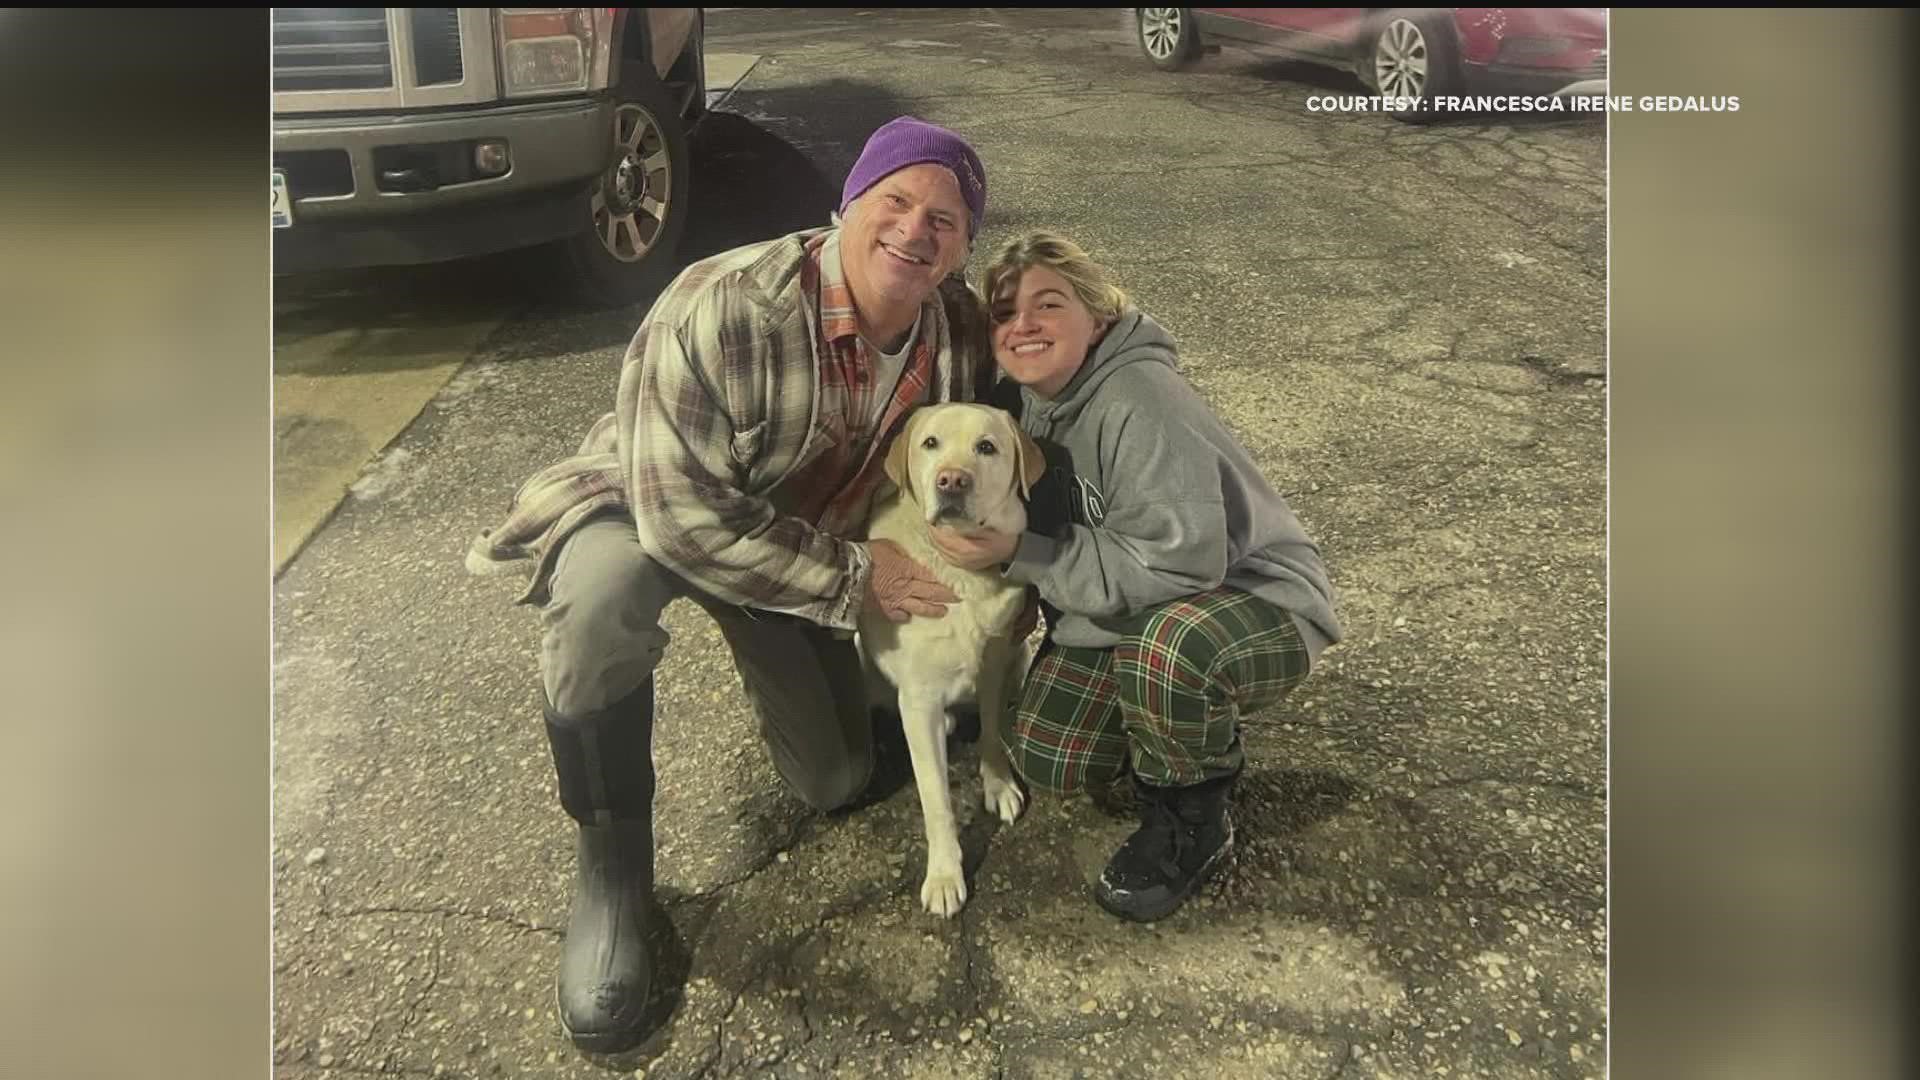 A beloved service dog named Duke who was stolen along with his owner's pickup Thursday morning was found wandering near I-94 and reunited with family.